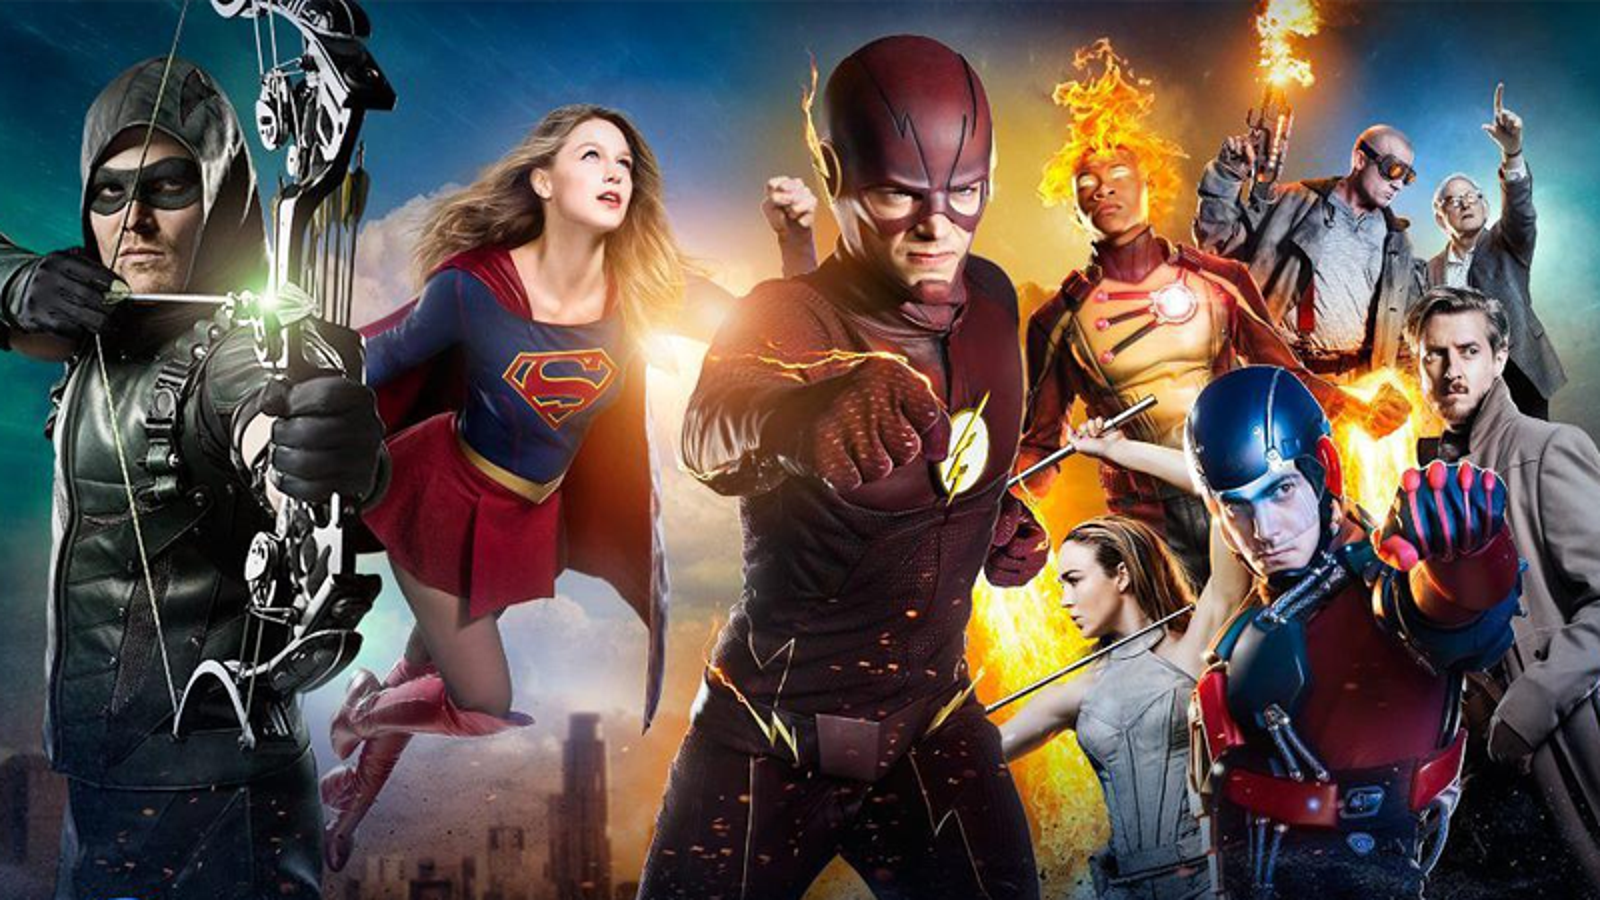 Here's What We Want From the CW's DC Superhero Shows Next Season